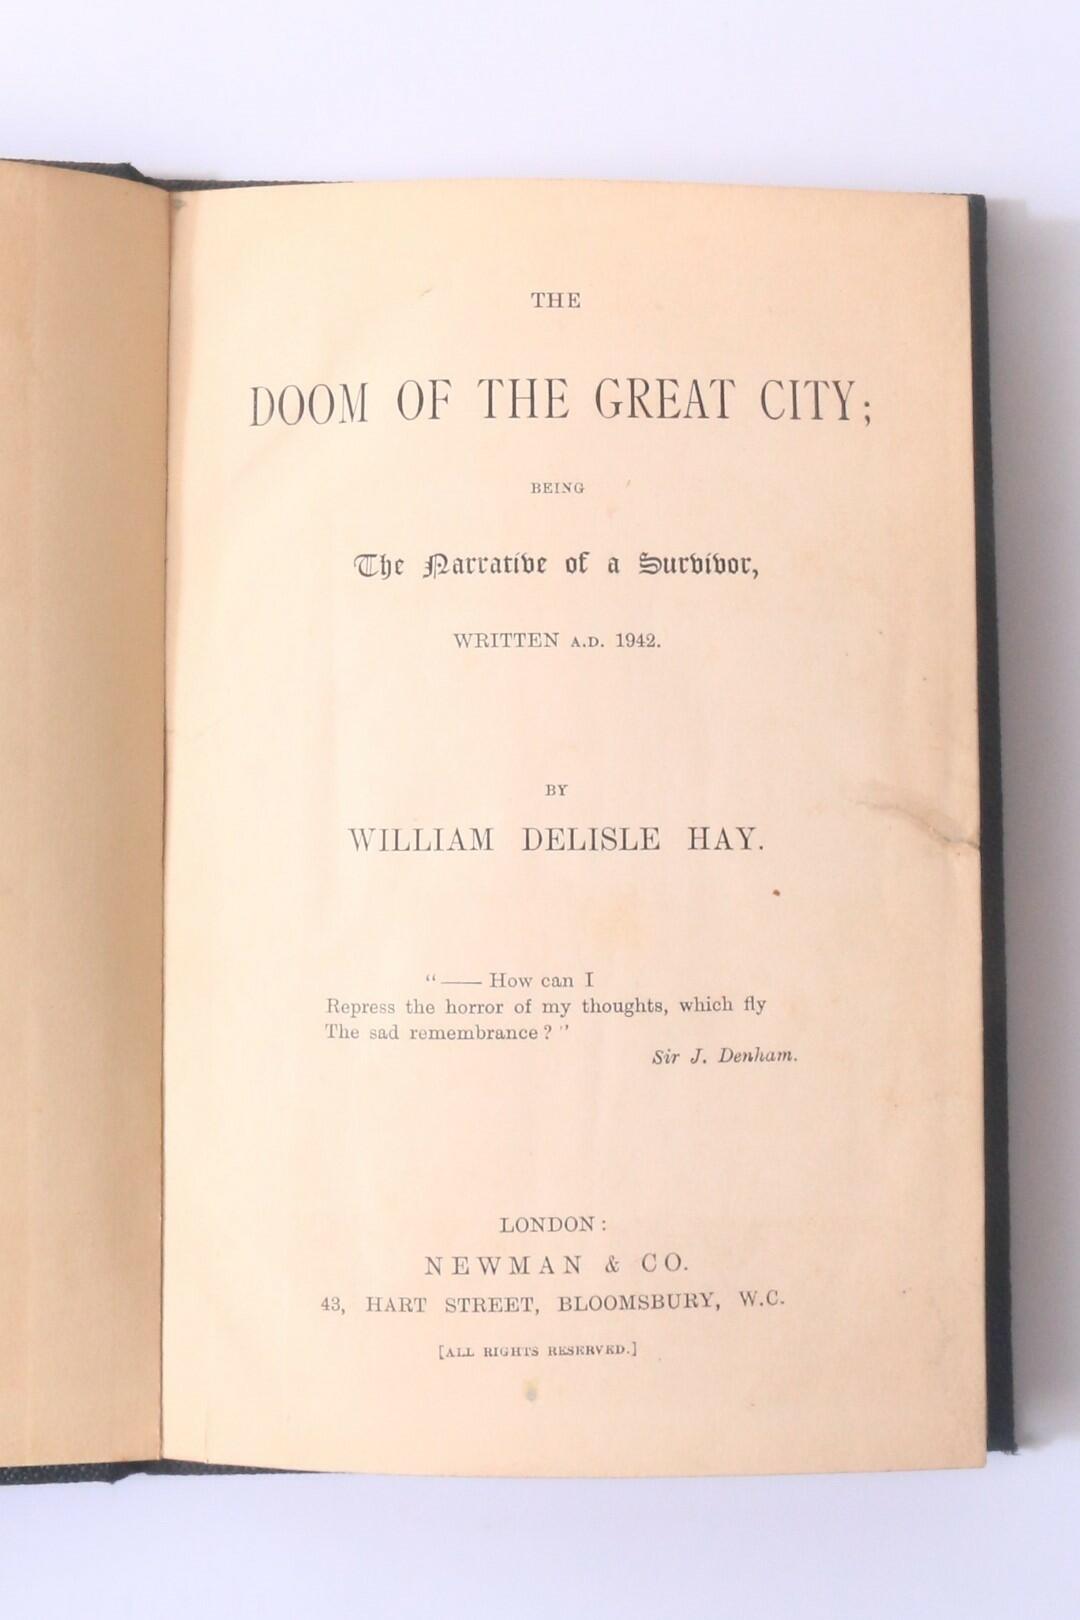 William Delisle Hay - The Doom of the Great City Being the Narrative of a Survivor Written A.D. 1942 - Newman & Co., n.d. [1880], First Edition.